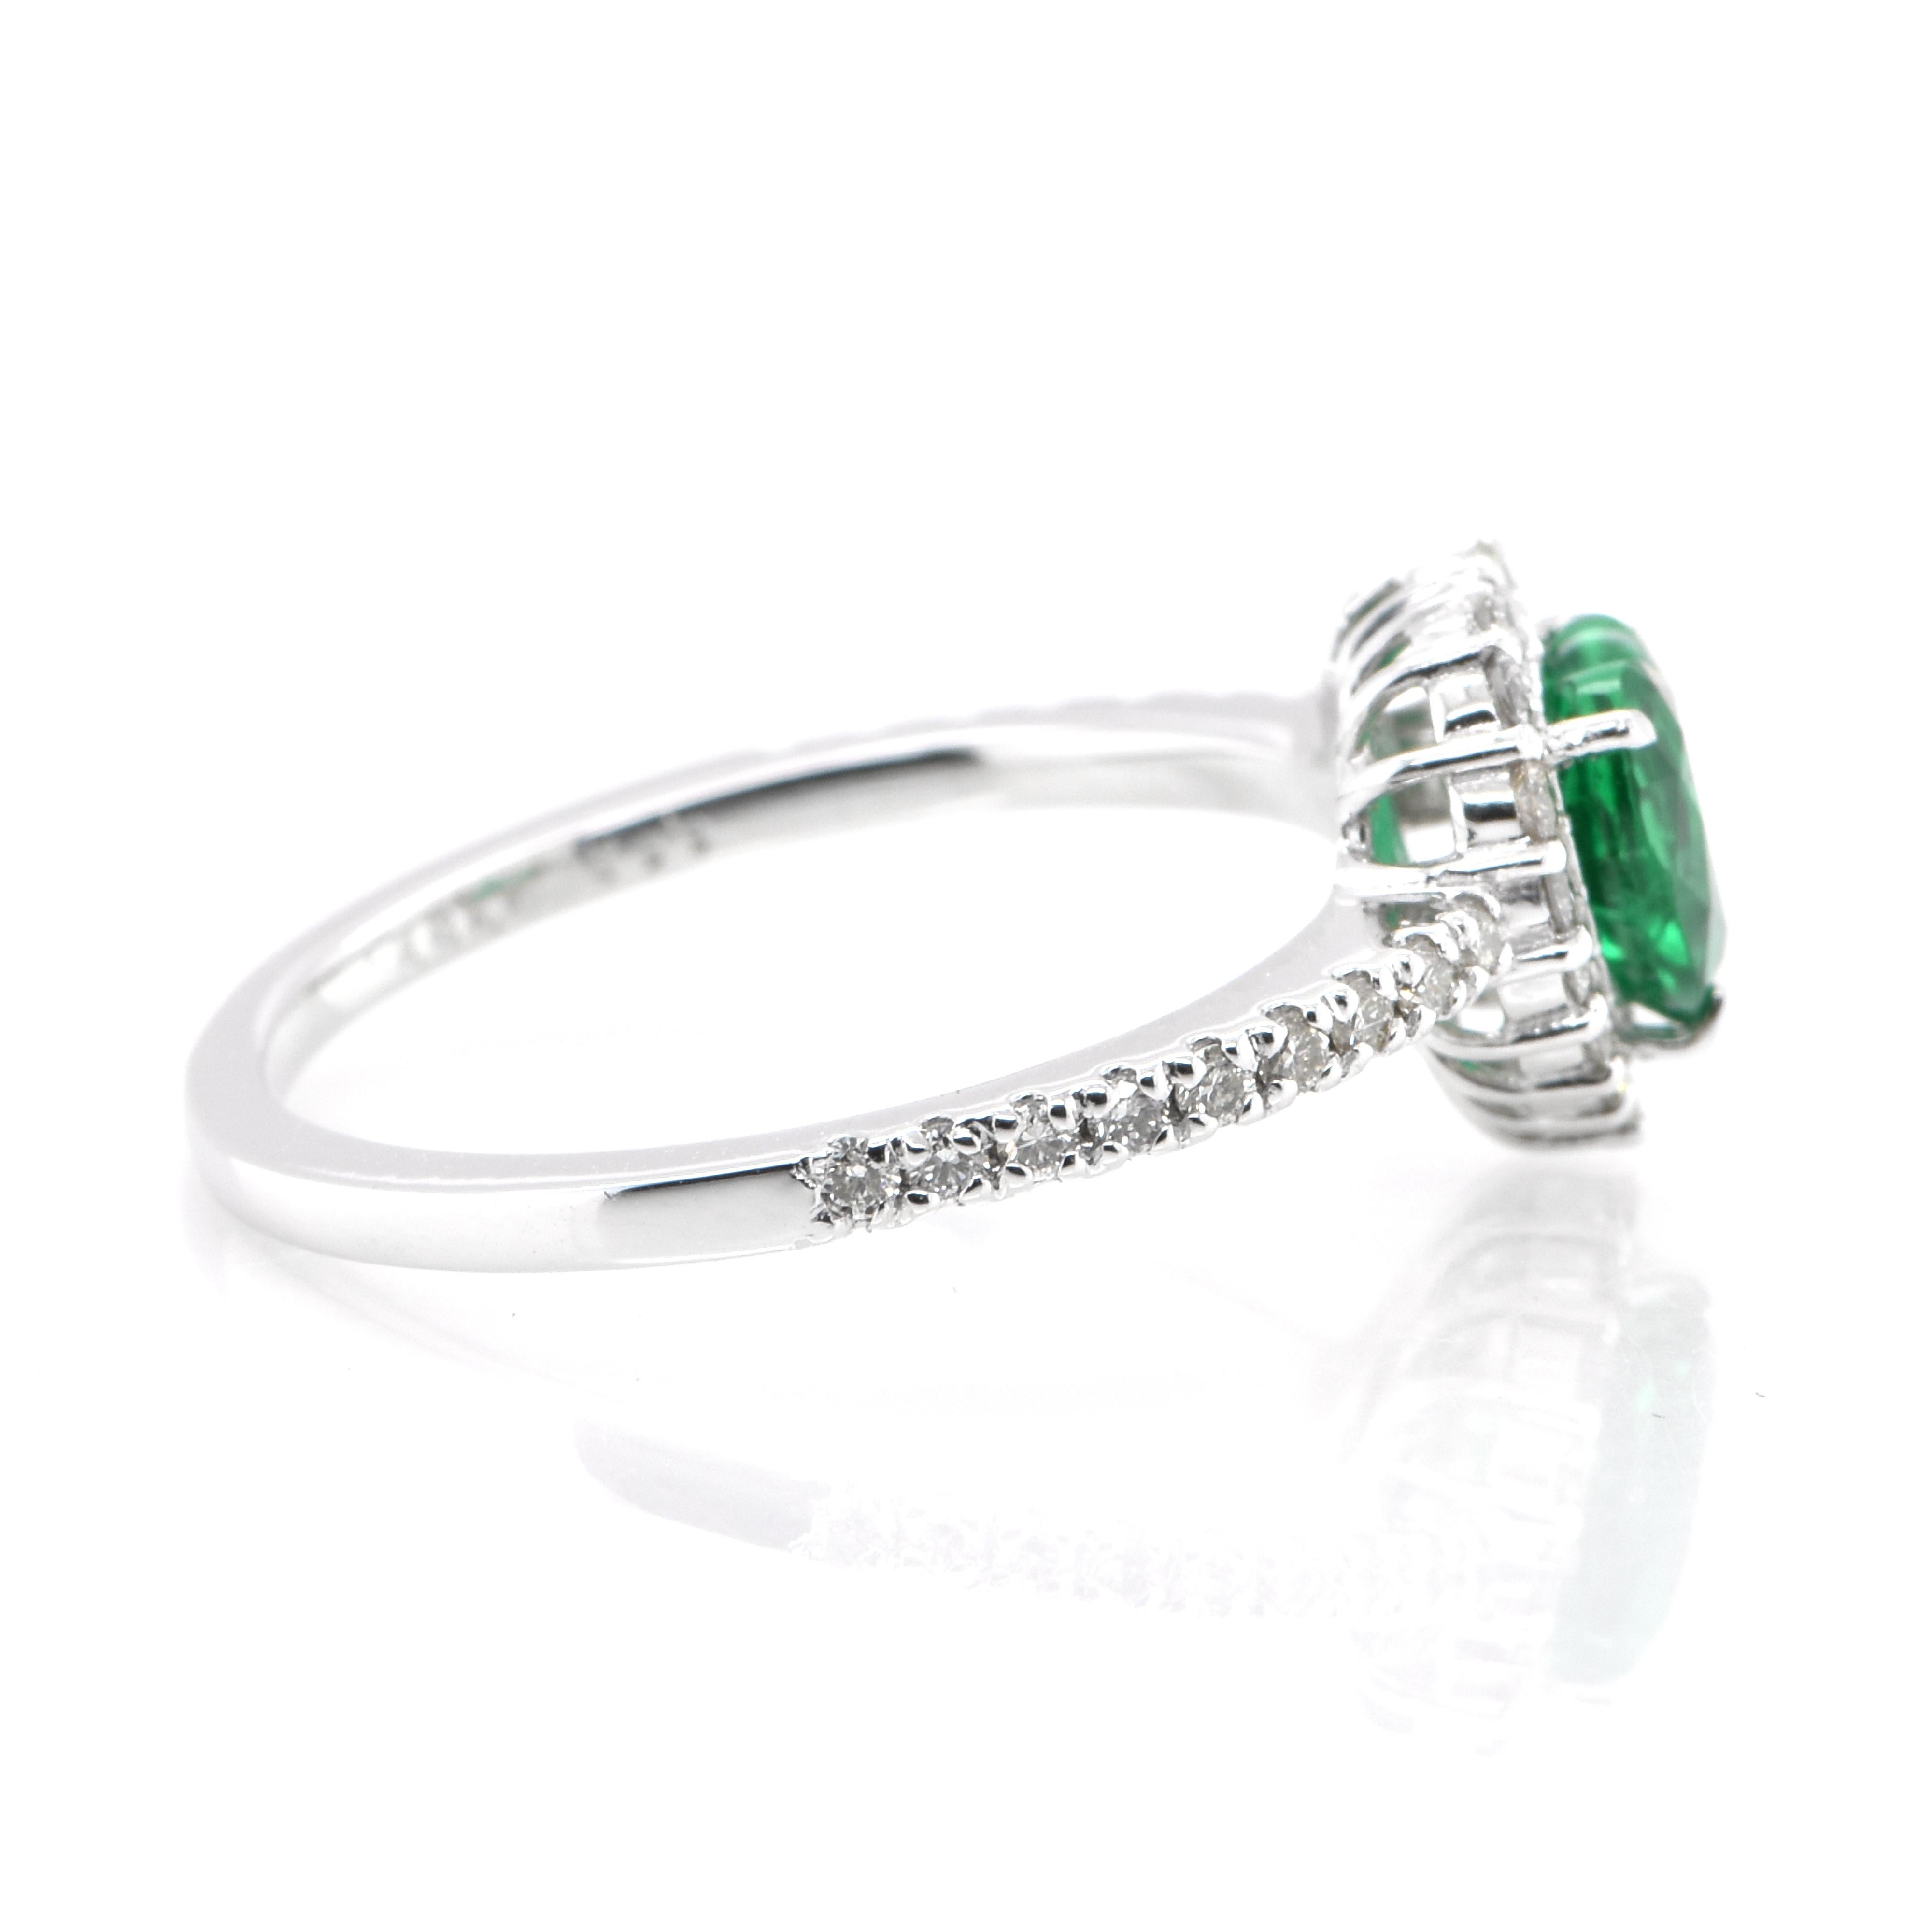  0.63 Carat Natural, Heart-Cut, Zambian Emerald & Diamond Ring Set in Platinum In New Condition For Sale In Tokyo, JP